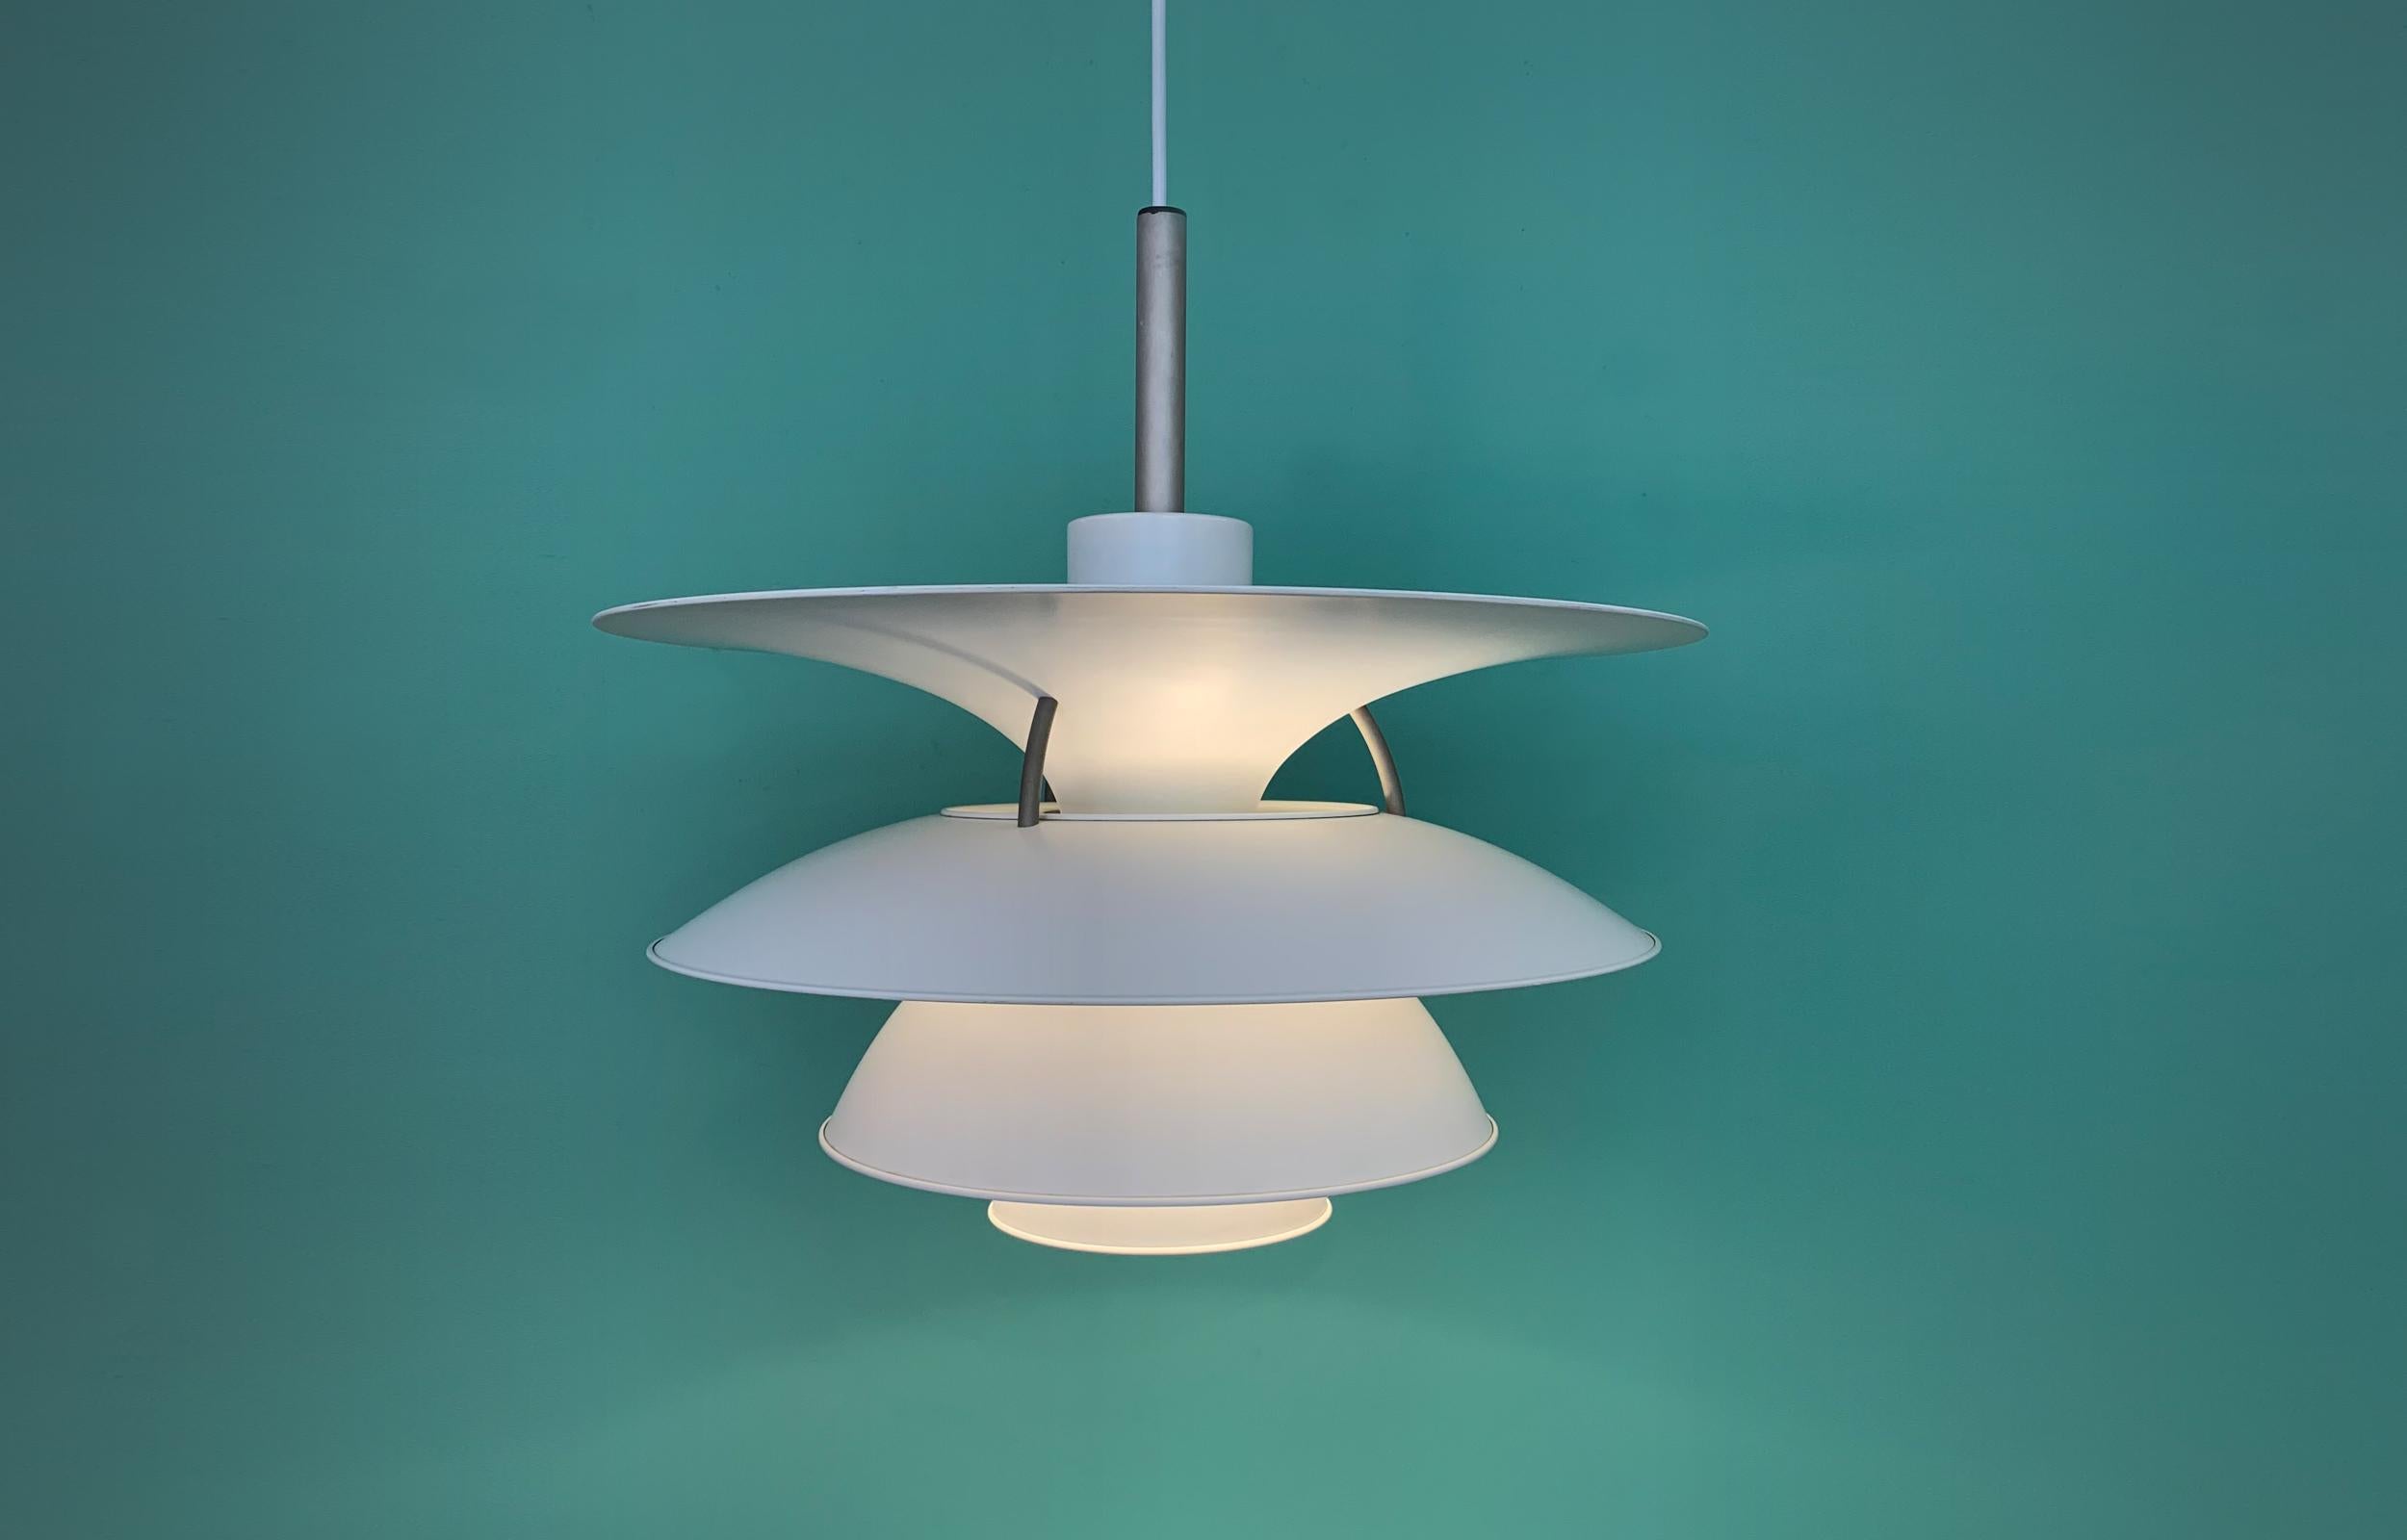 Wonderful pendant lamp designed by Poul Henningsen. Produced by Louis Poulsen Denmark. 
New white 2.5 m fabric cord. 

Mid-Century Modern Classic design.

Perfect original condition with minor wear consistent with age and use.